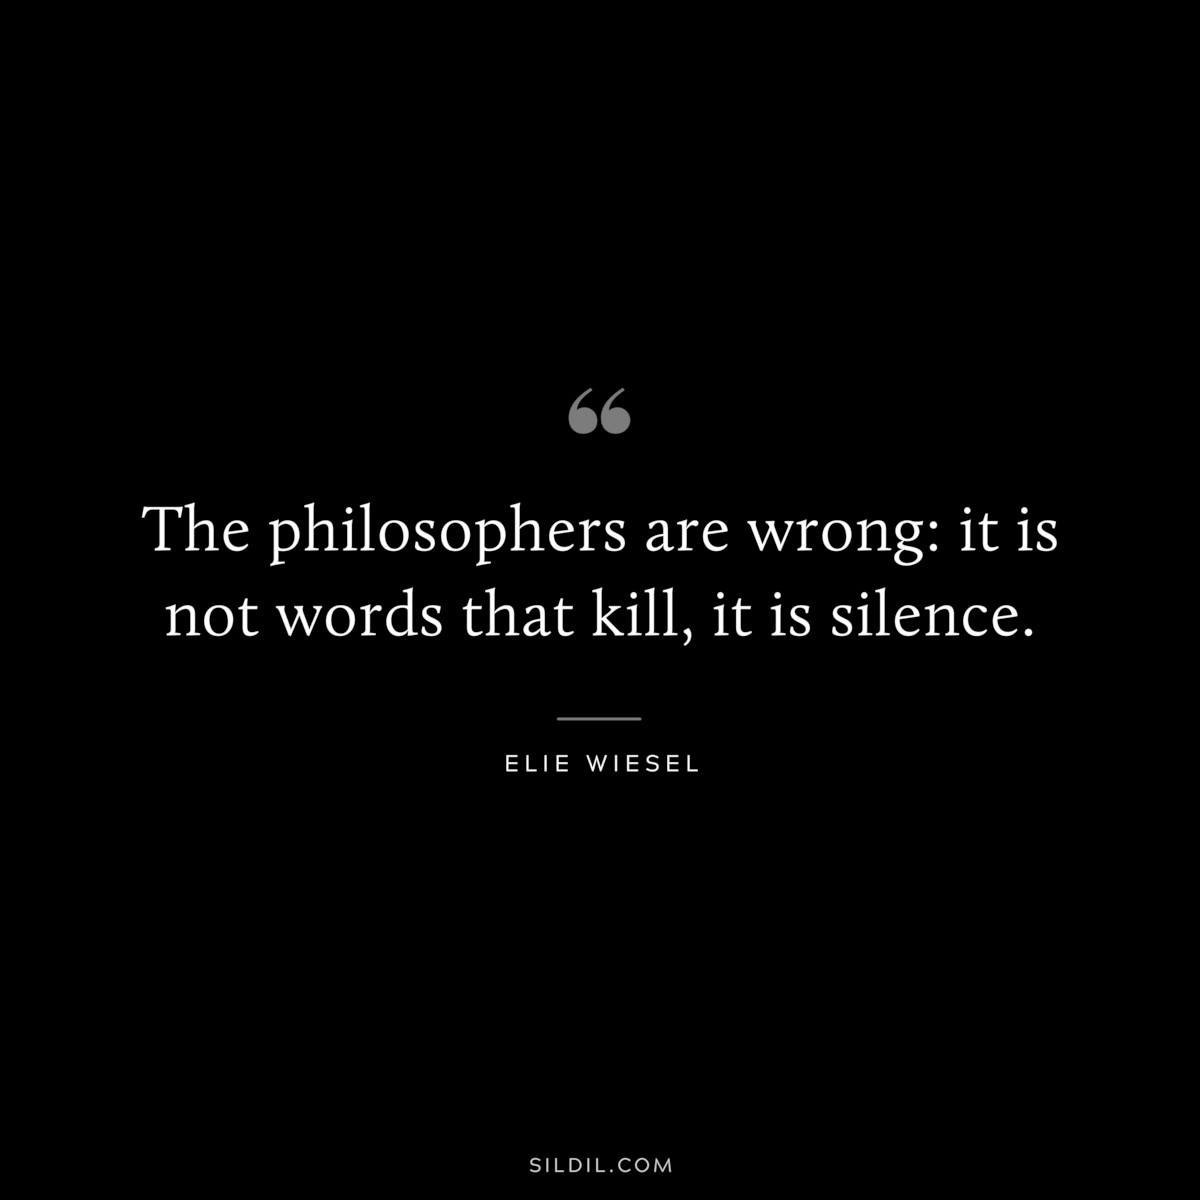 The philosophers are wrong: it is not words that kill, it is silence. ― Elie Wiesel